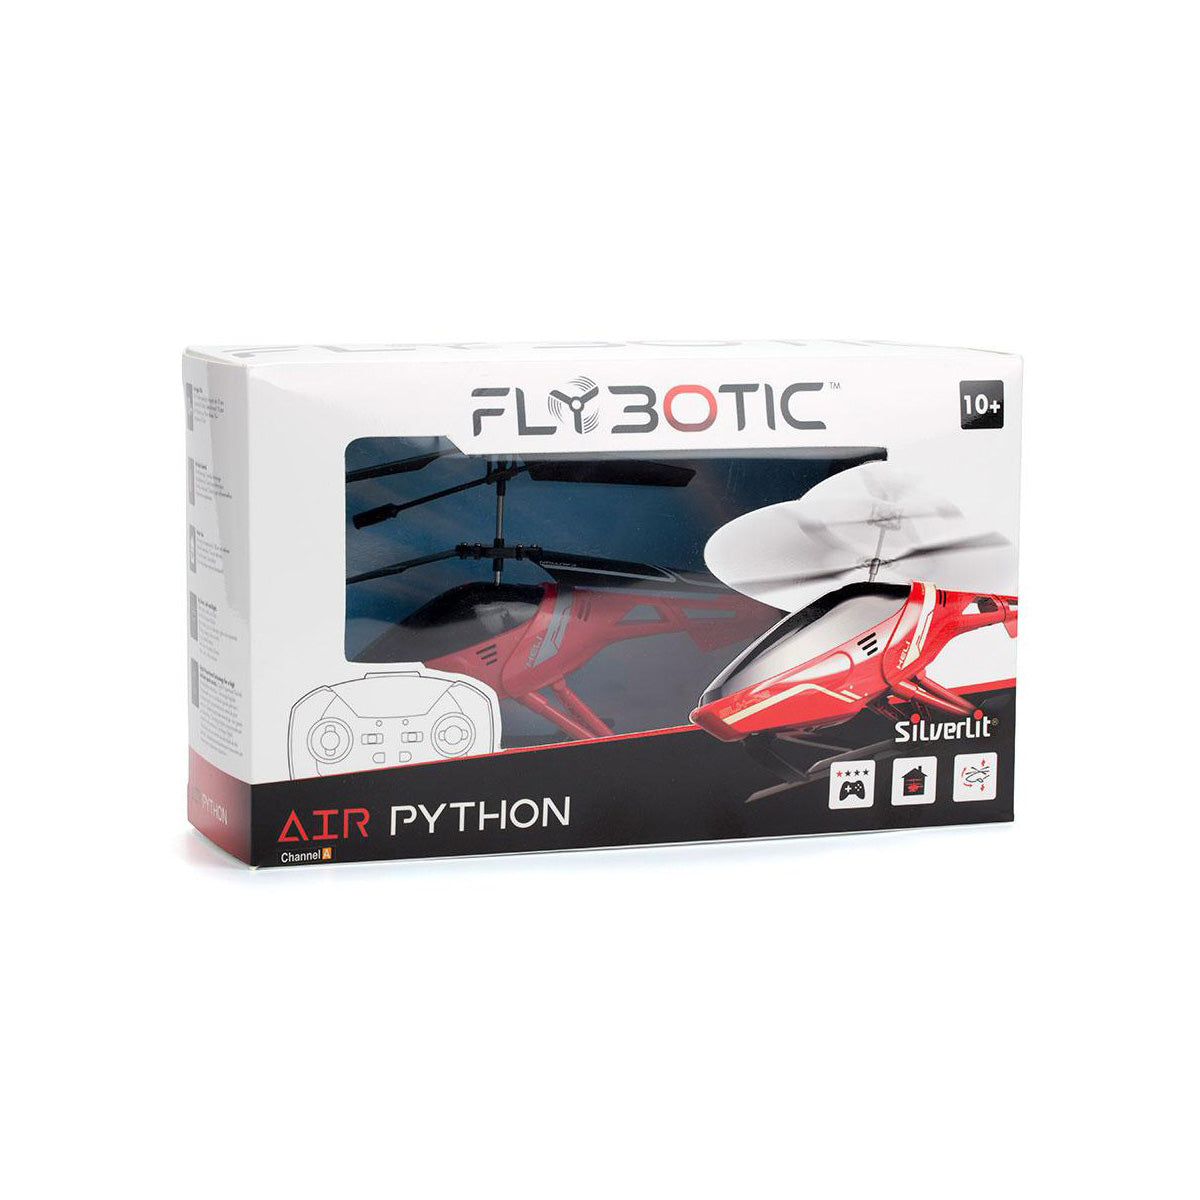 Silverlit Air Python Beginner RC Helicopter - Assorted Colors - Hobbytech Toys